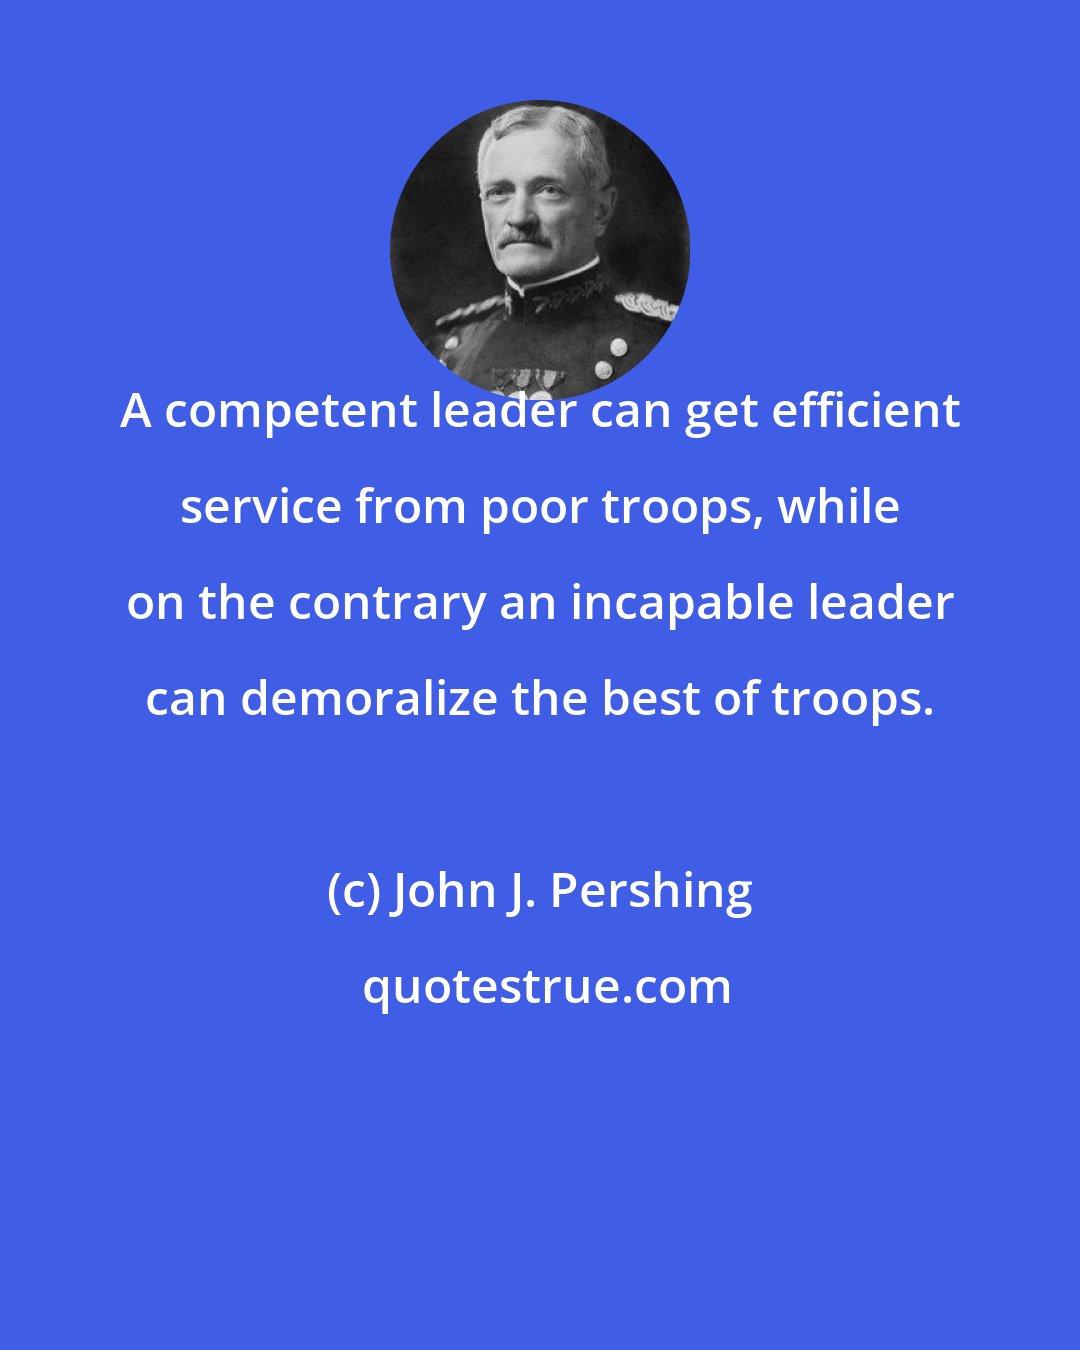 John J. Pershing: A competent leader can get efficient service from poor troops, while on the contrary an incapable leader can demoralize the best of troops.